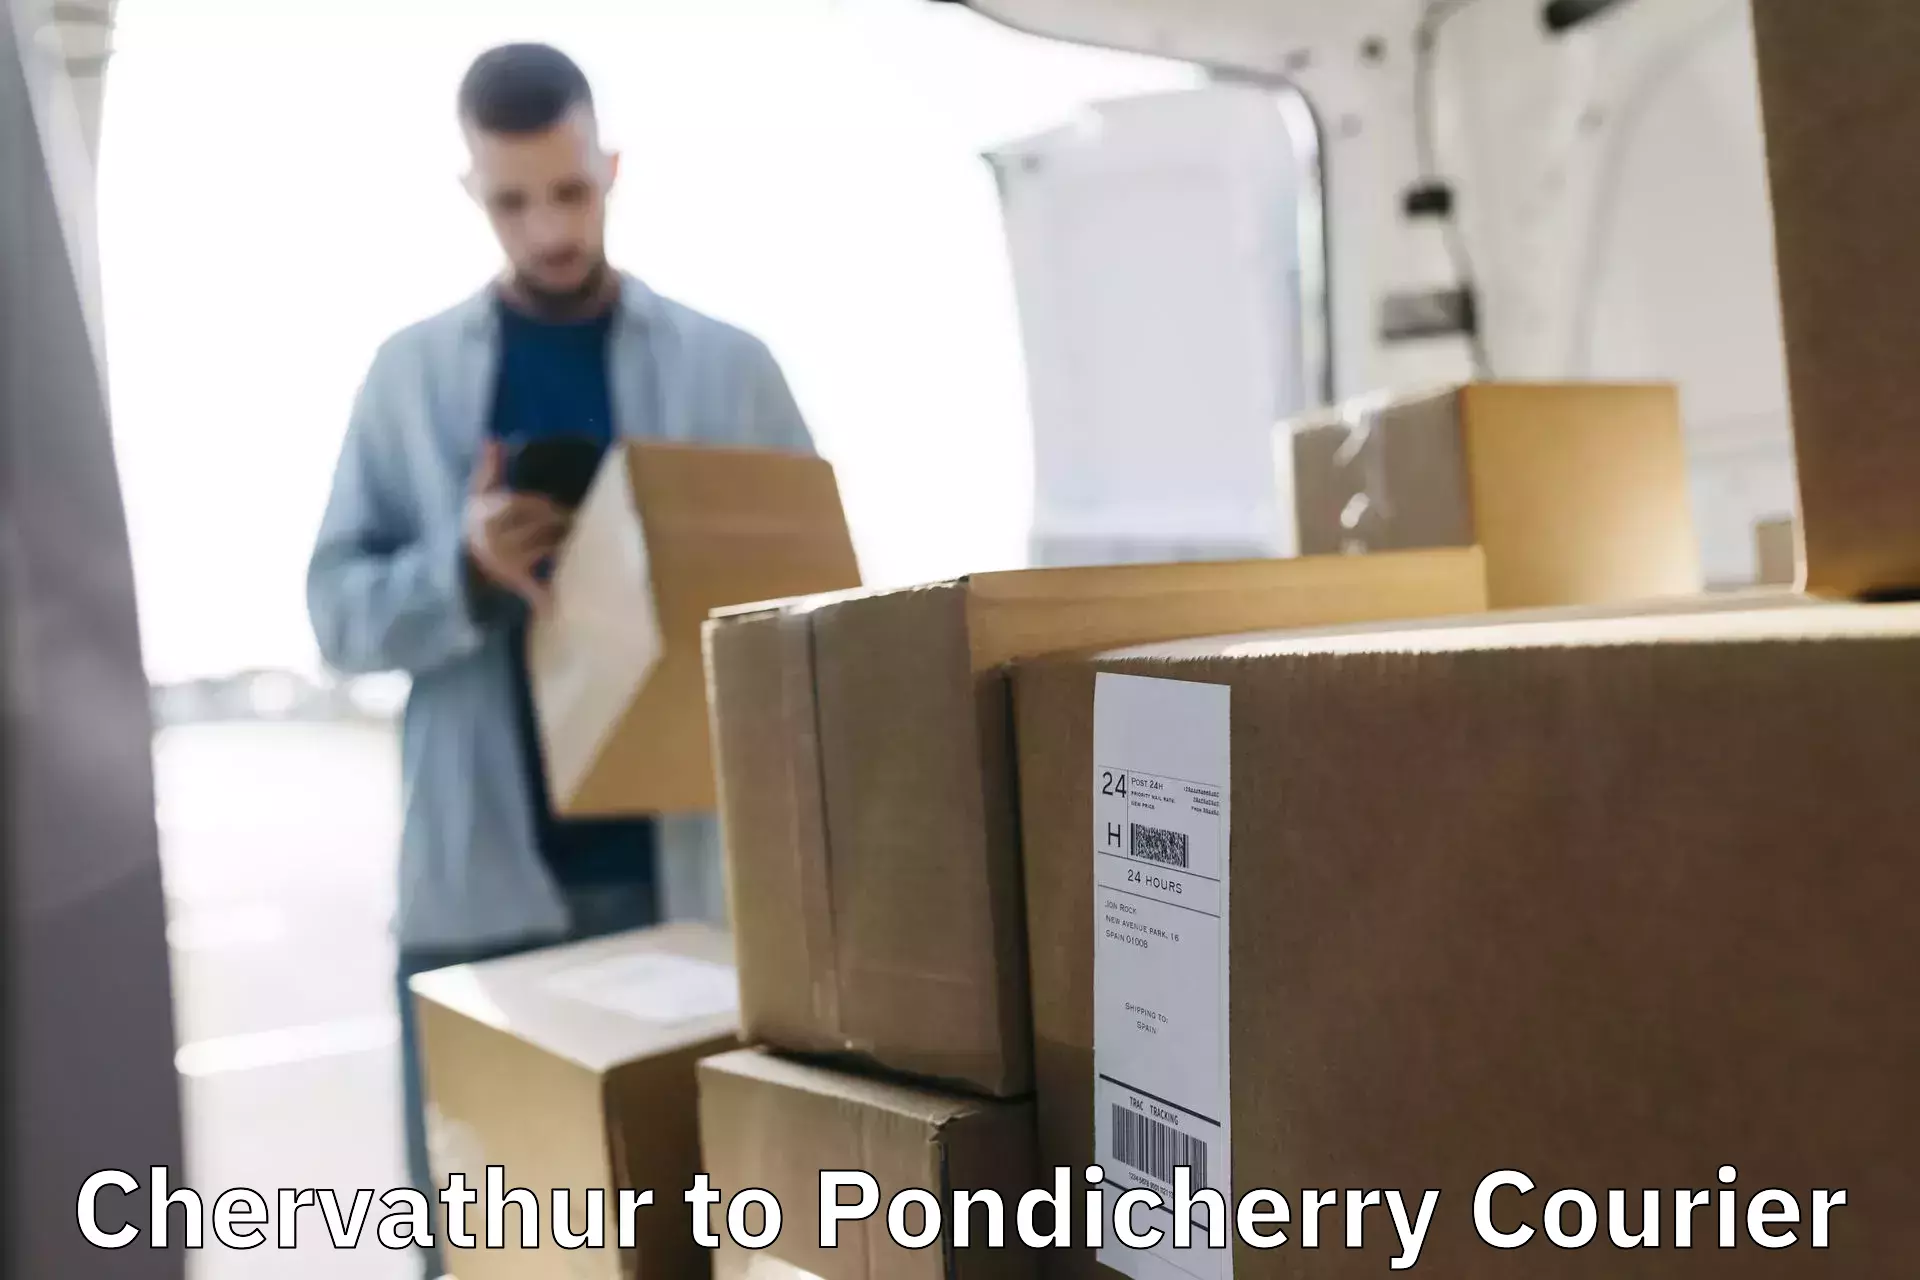 Express delivery solutions Chervathur to Pondicherry